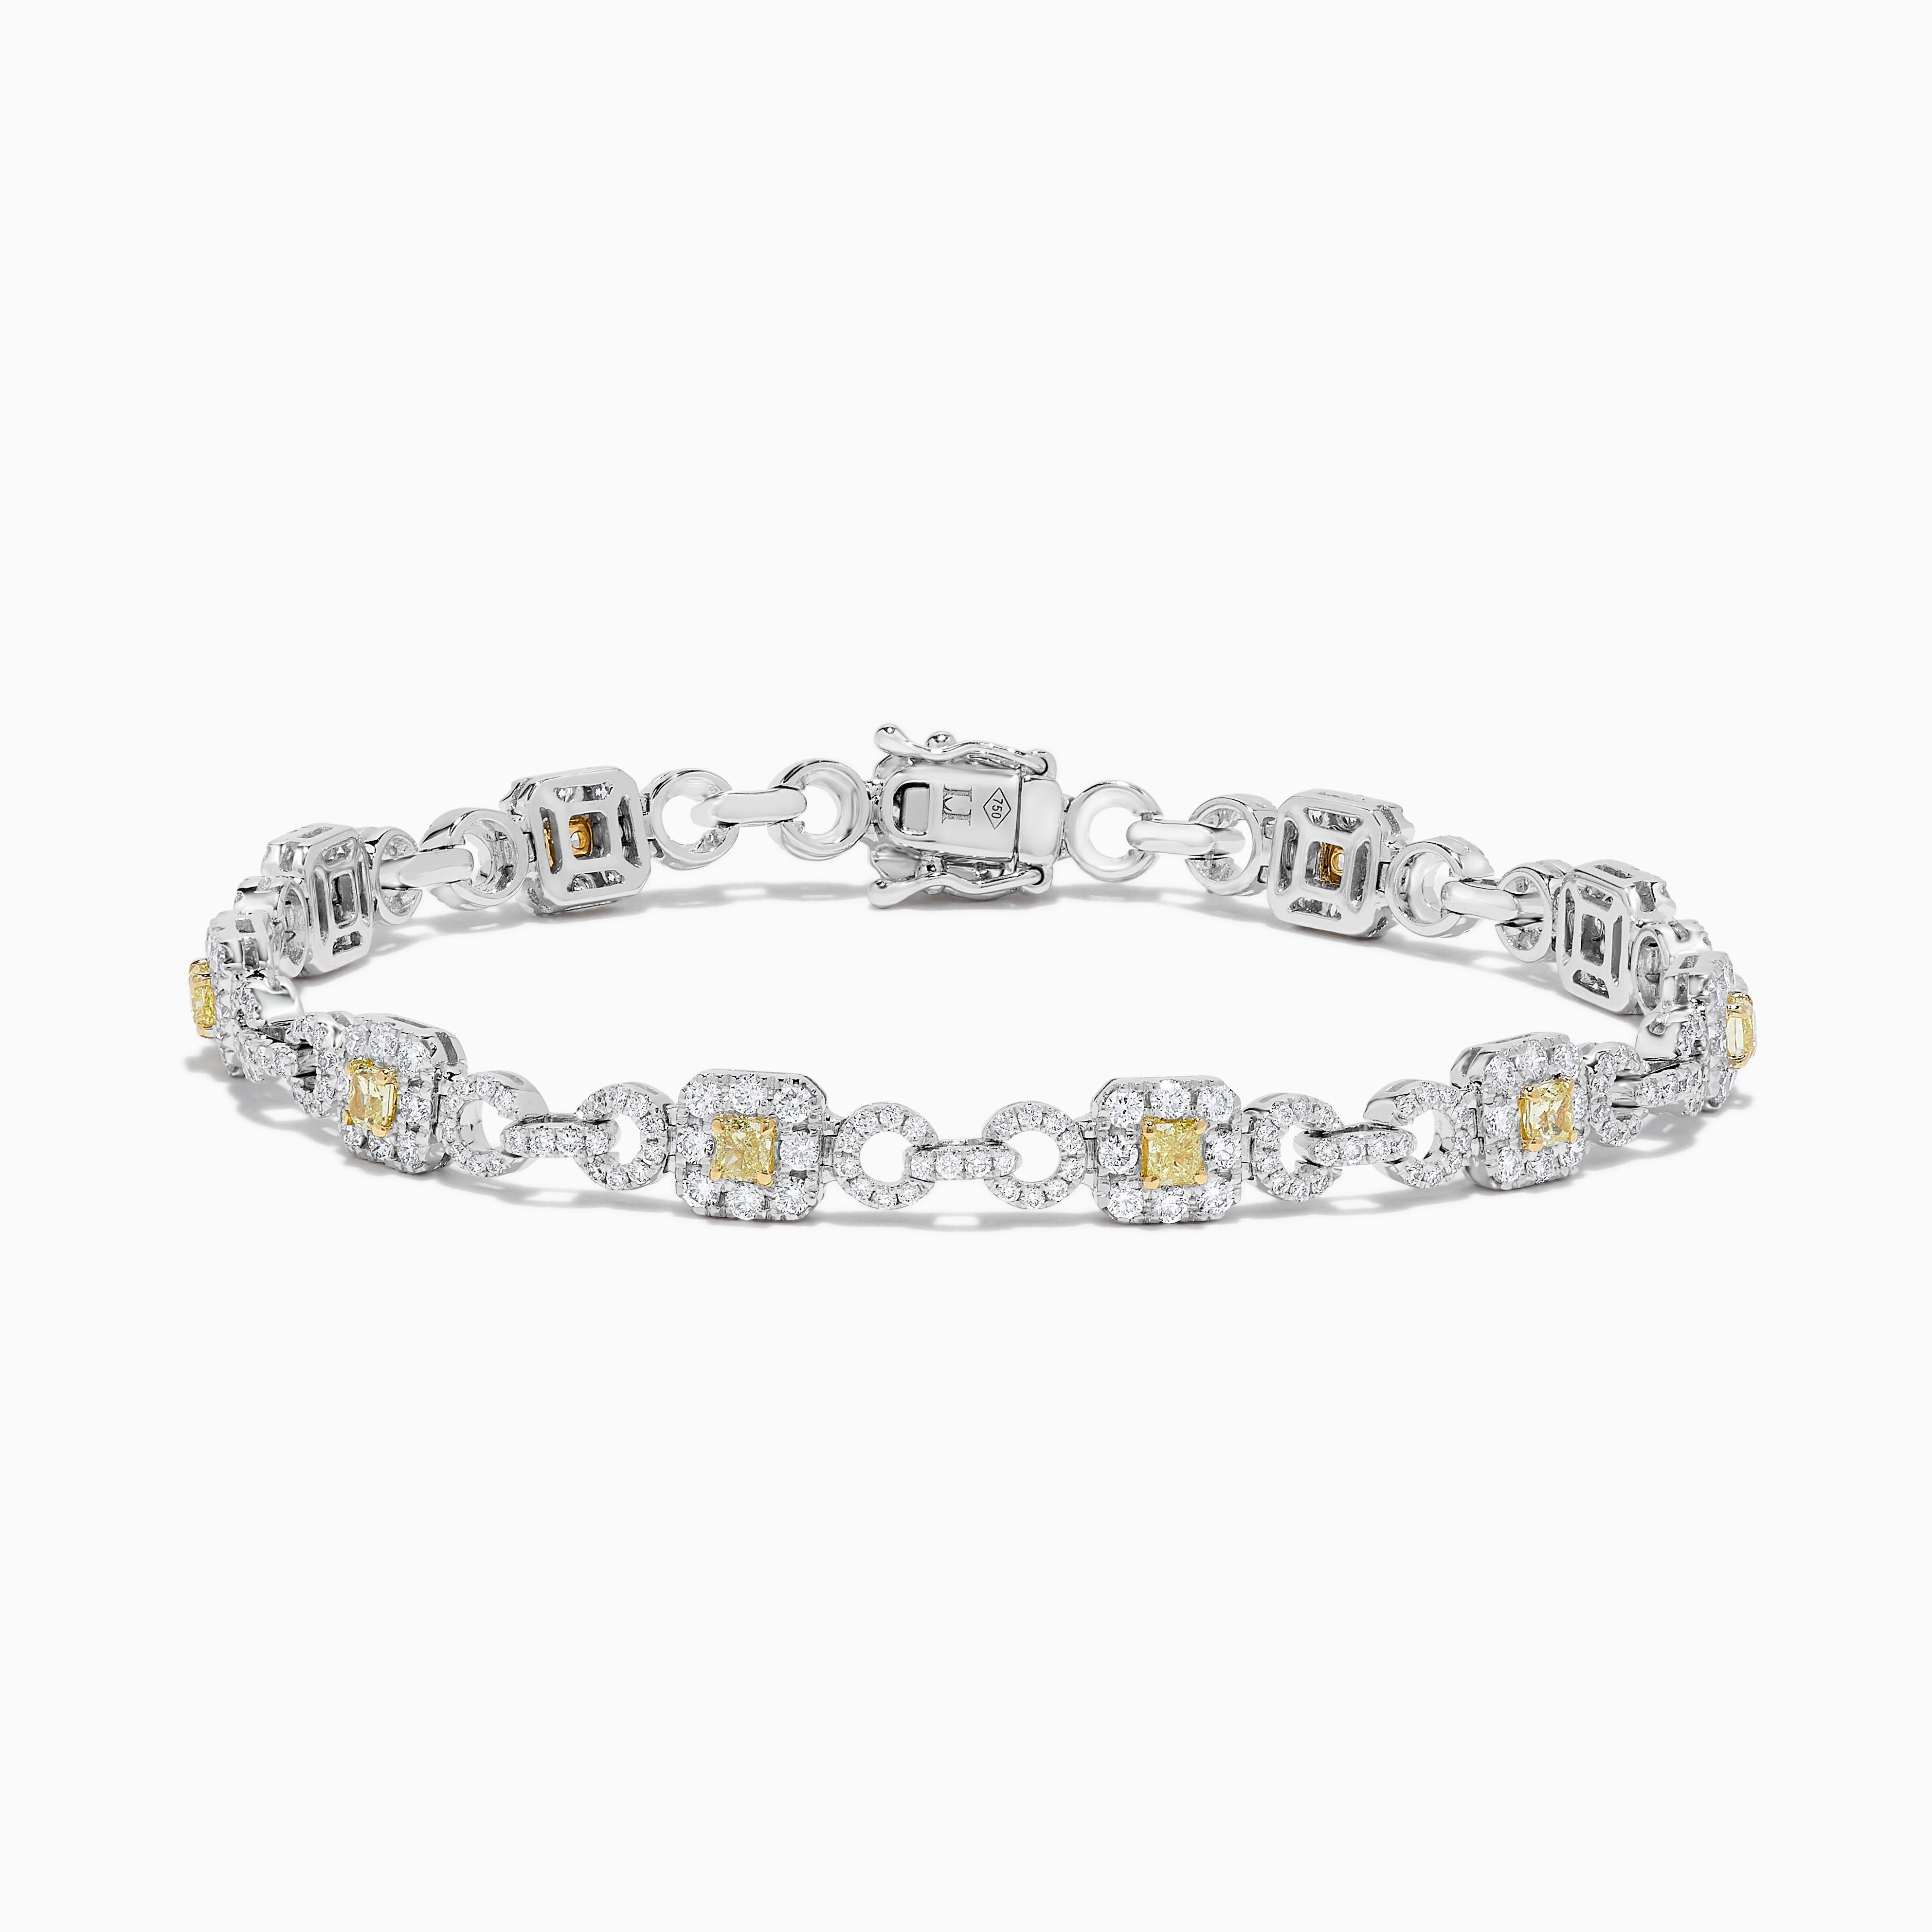 RareGemWorld's classic diamond bracelet. Mounted in a beautiful 18K Yellow and White Gold setting with natural cushion cut yellow diamonds. The yellow diamonds are surrounded by small round natural white diamond melee. This bracelet is guaranteed to